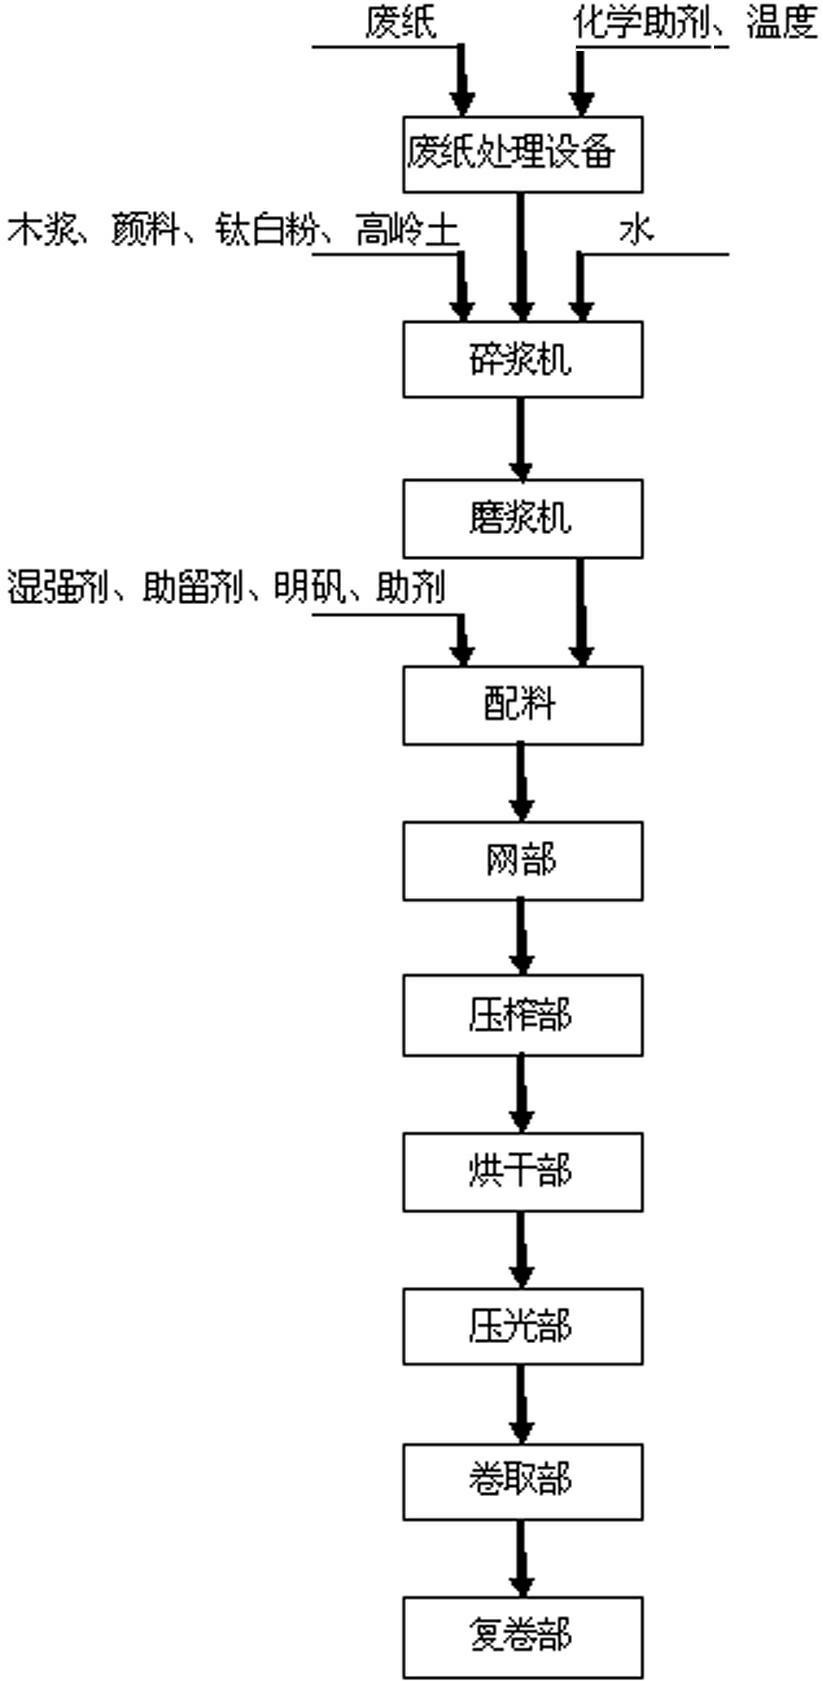 Process for producing printed decorative raw paper by using recycled waste paper